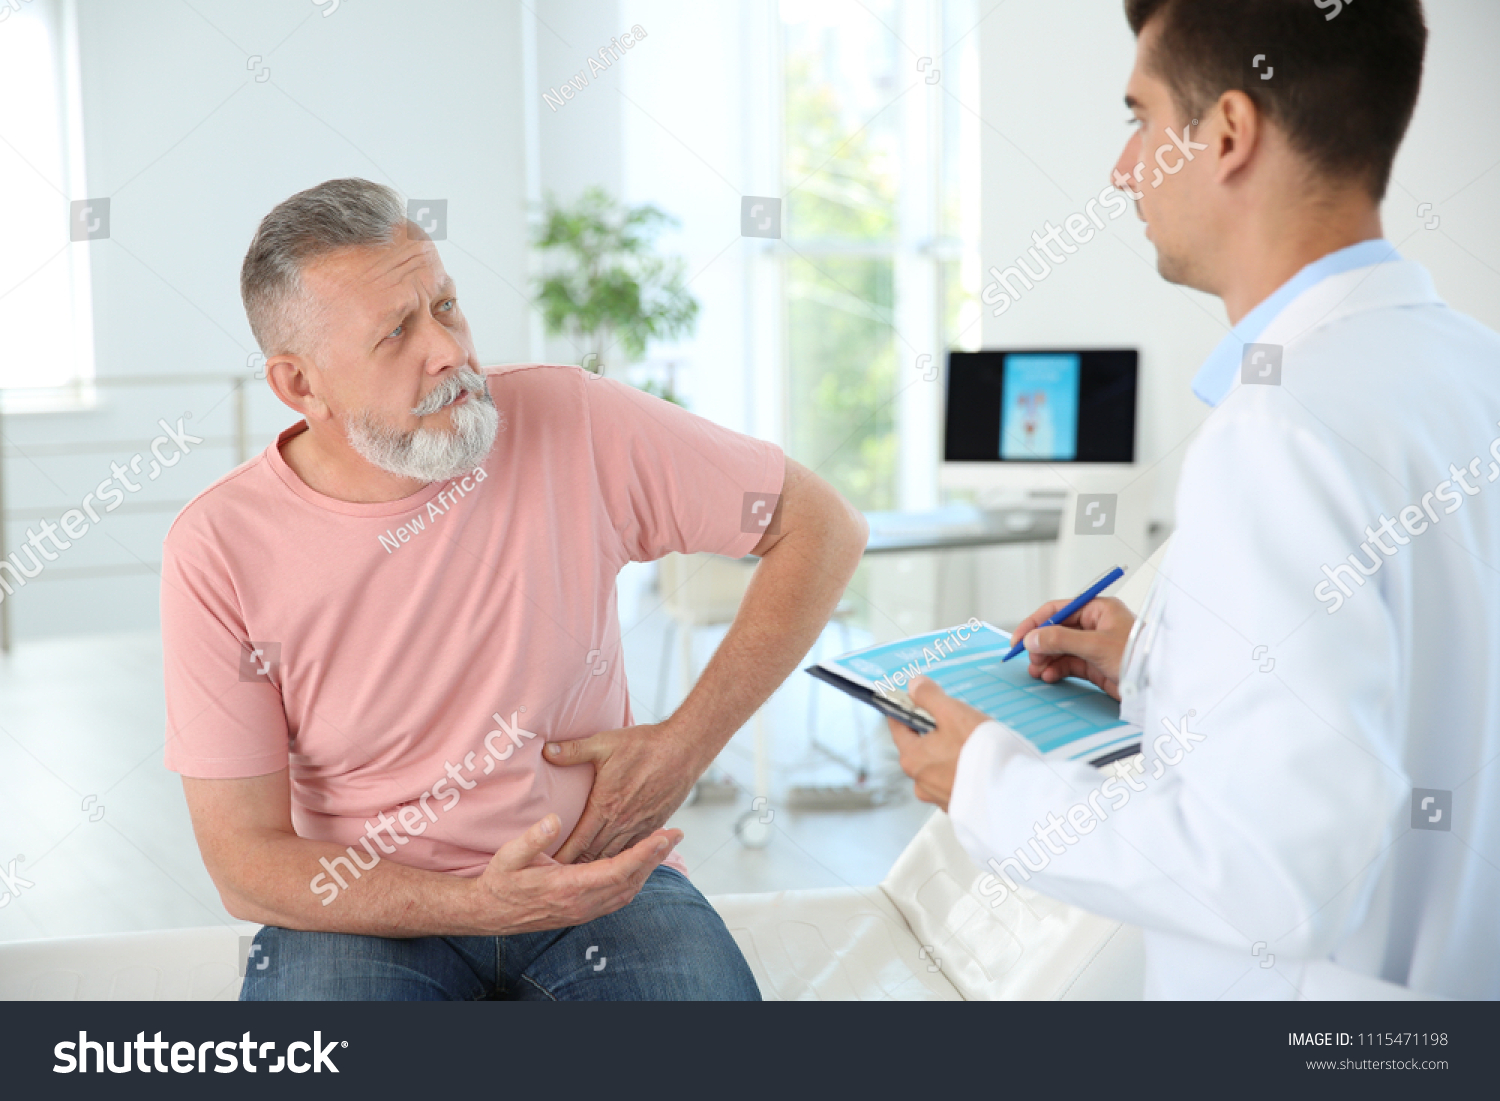 Man with health problem visiting urologist at hospital #1115471198